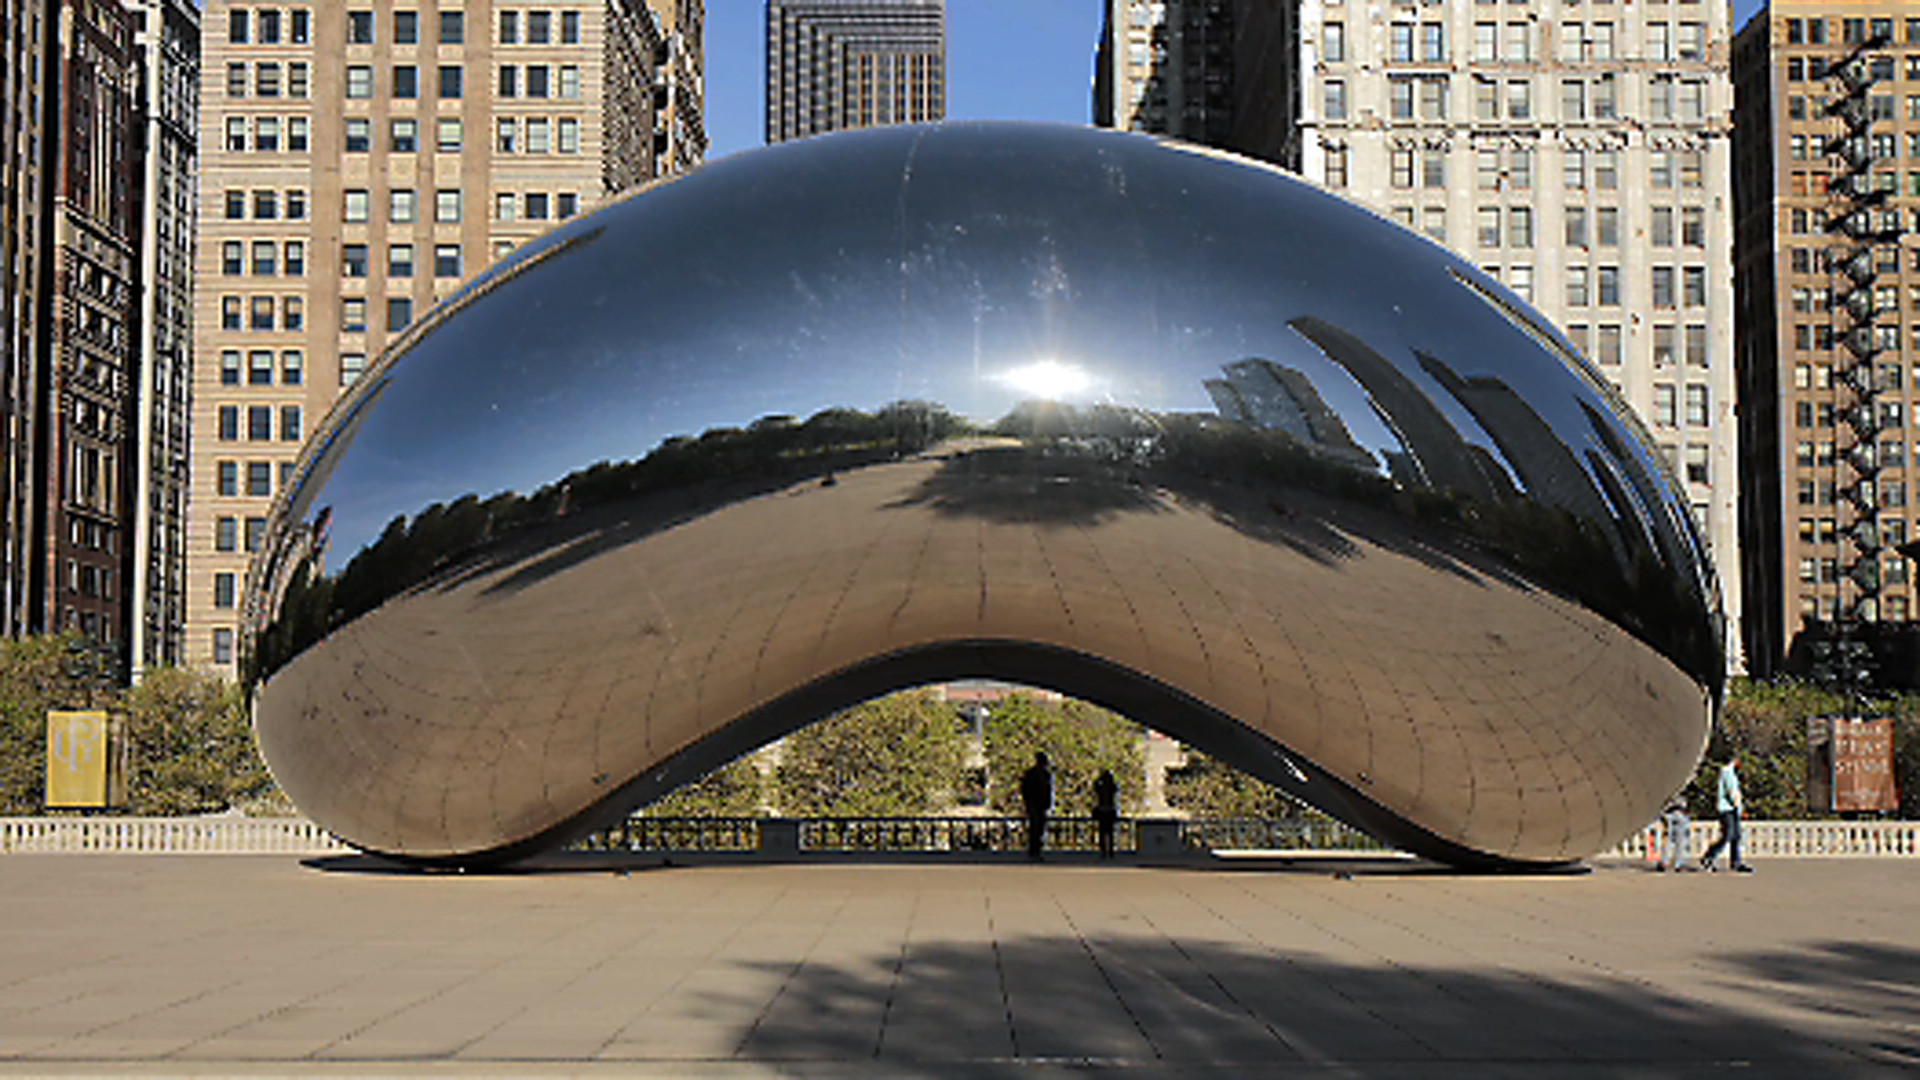 Time lapse video: A day at Chicago's 'Bean' - Chicago Tribune